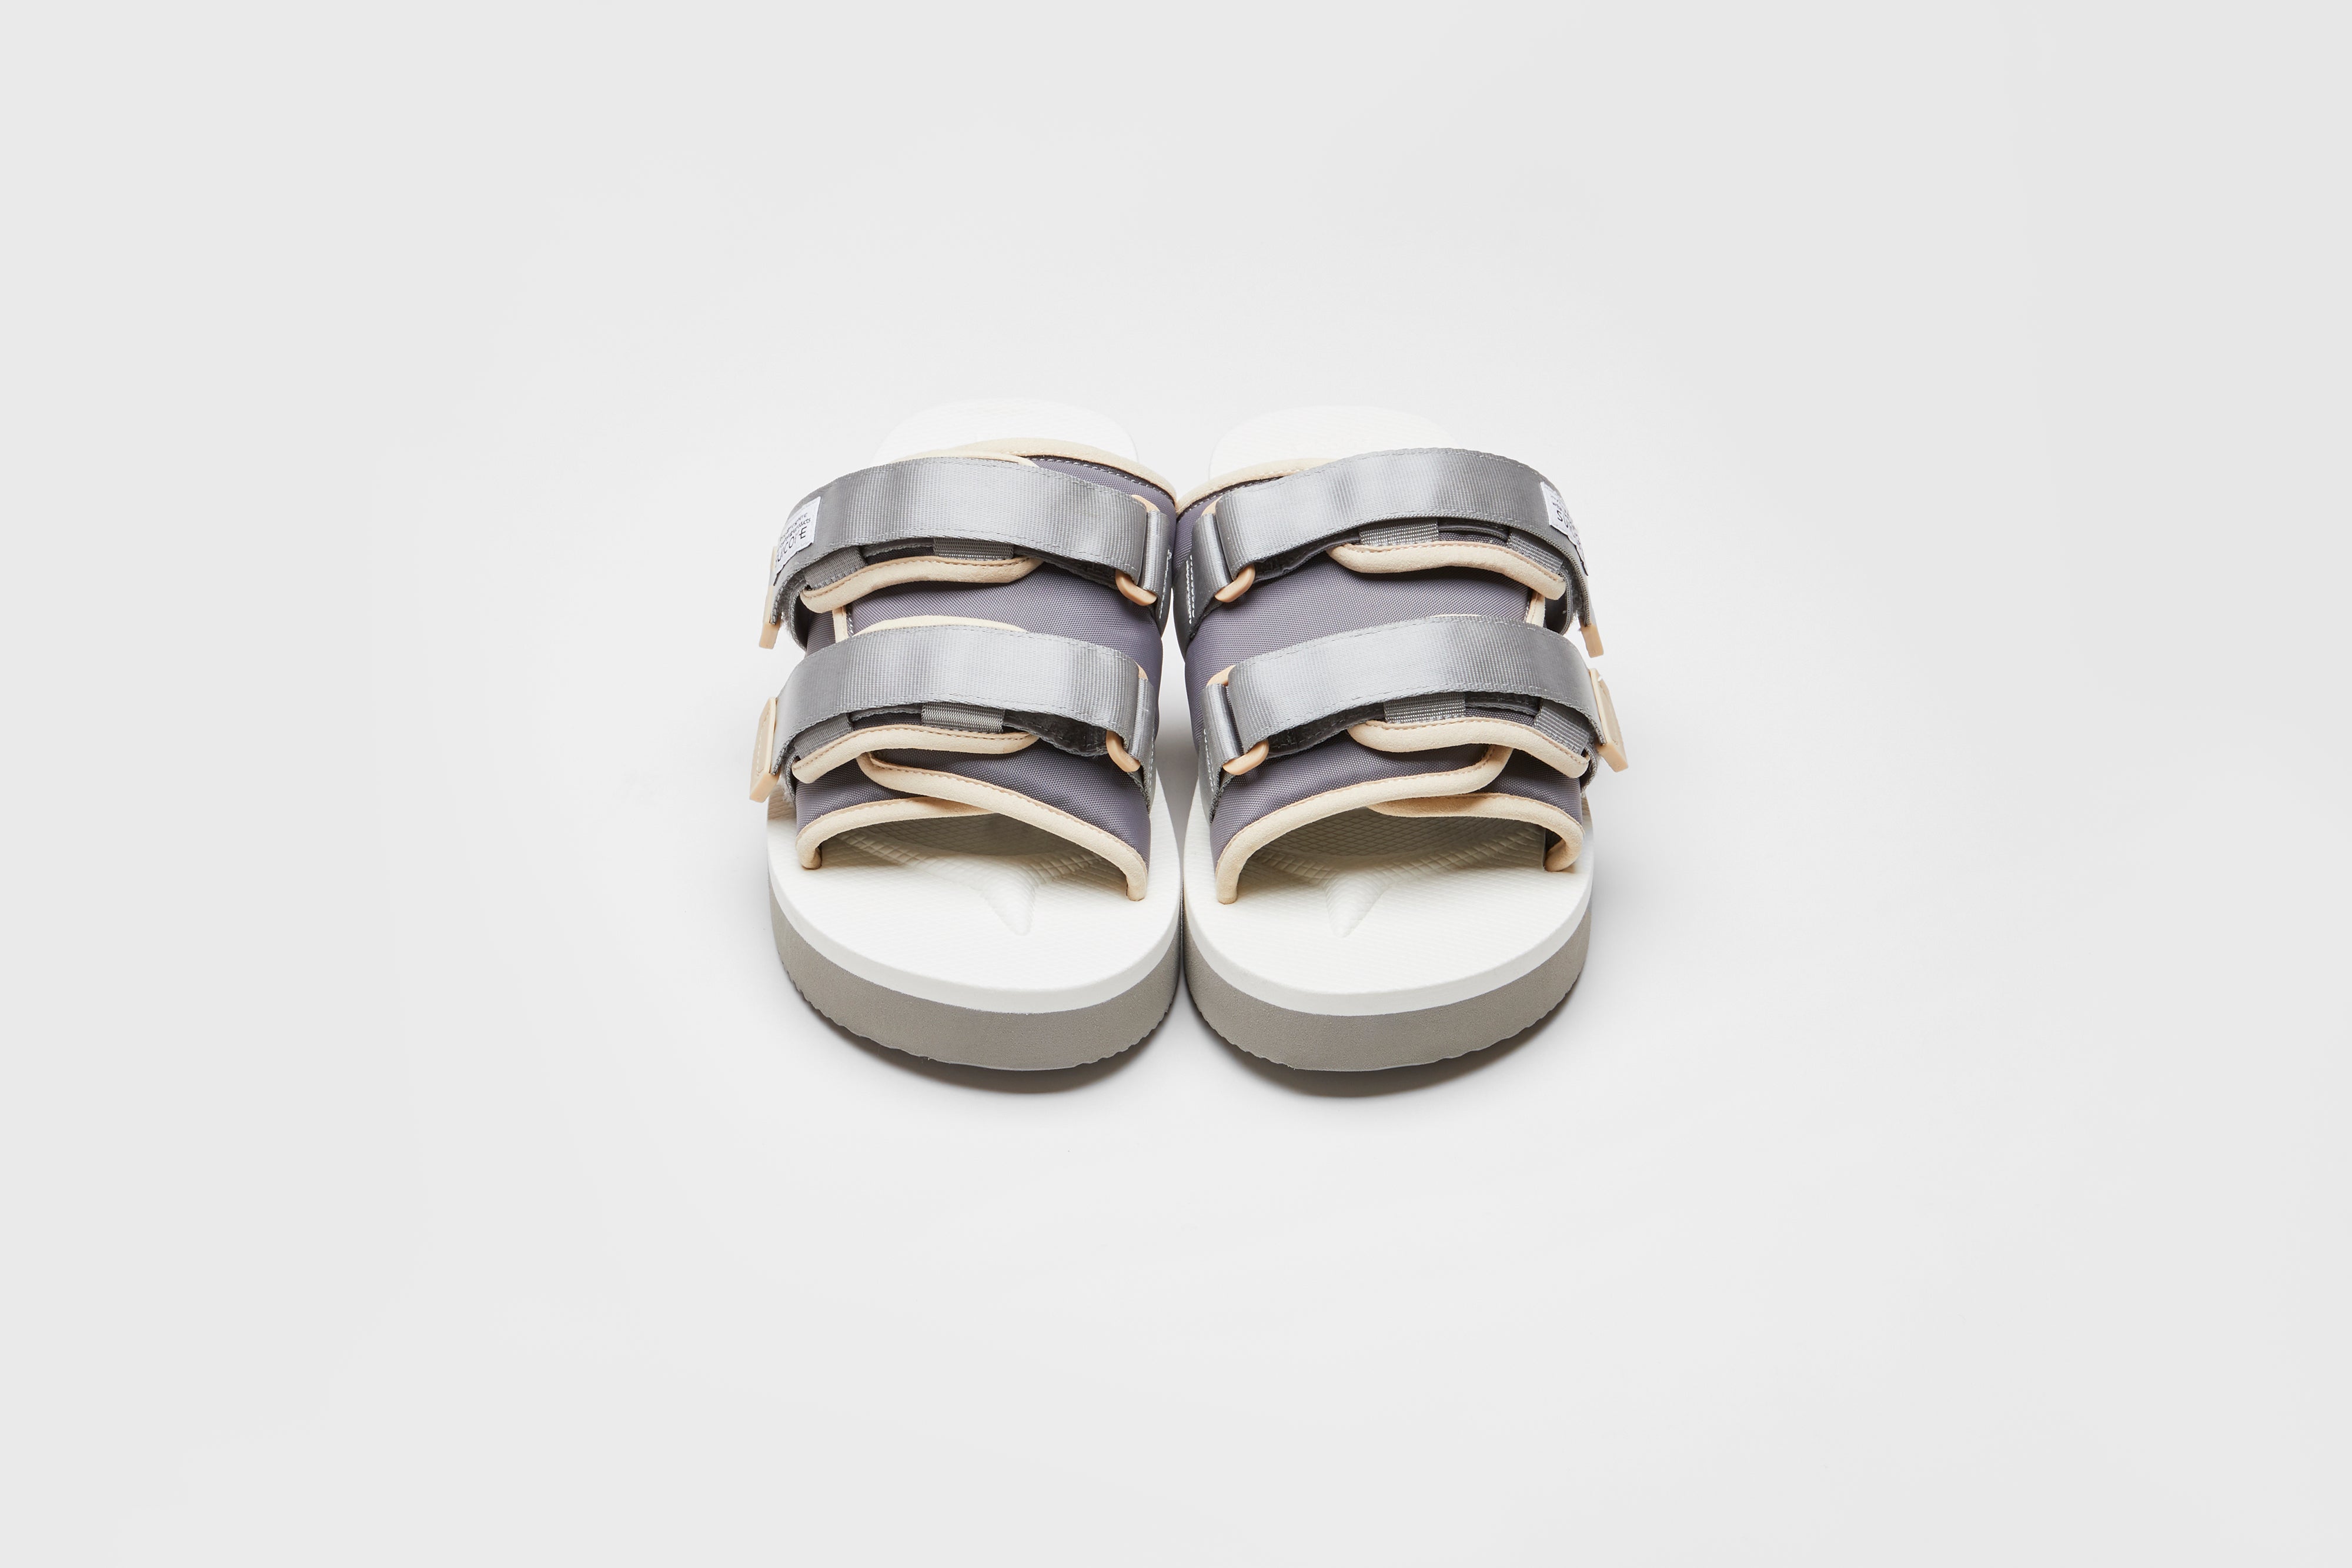 SUICOKE MOTO-PO slides with gray & white nylon upper, gray & white midsole and sole, strap and logo patch. From Spring/Summer 2023 collection on eightywingold Web Store, an official partner of SUICOKE. OG-056PO GRAY X WHITE